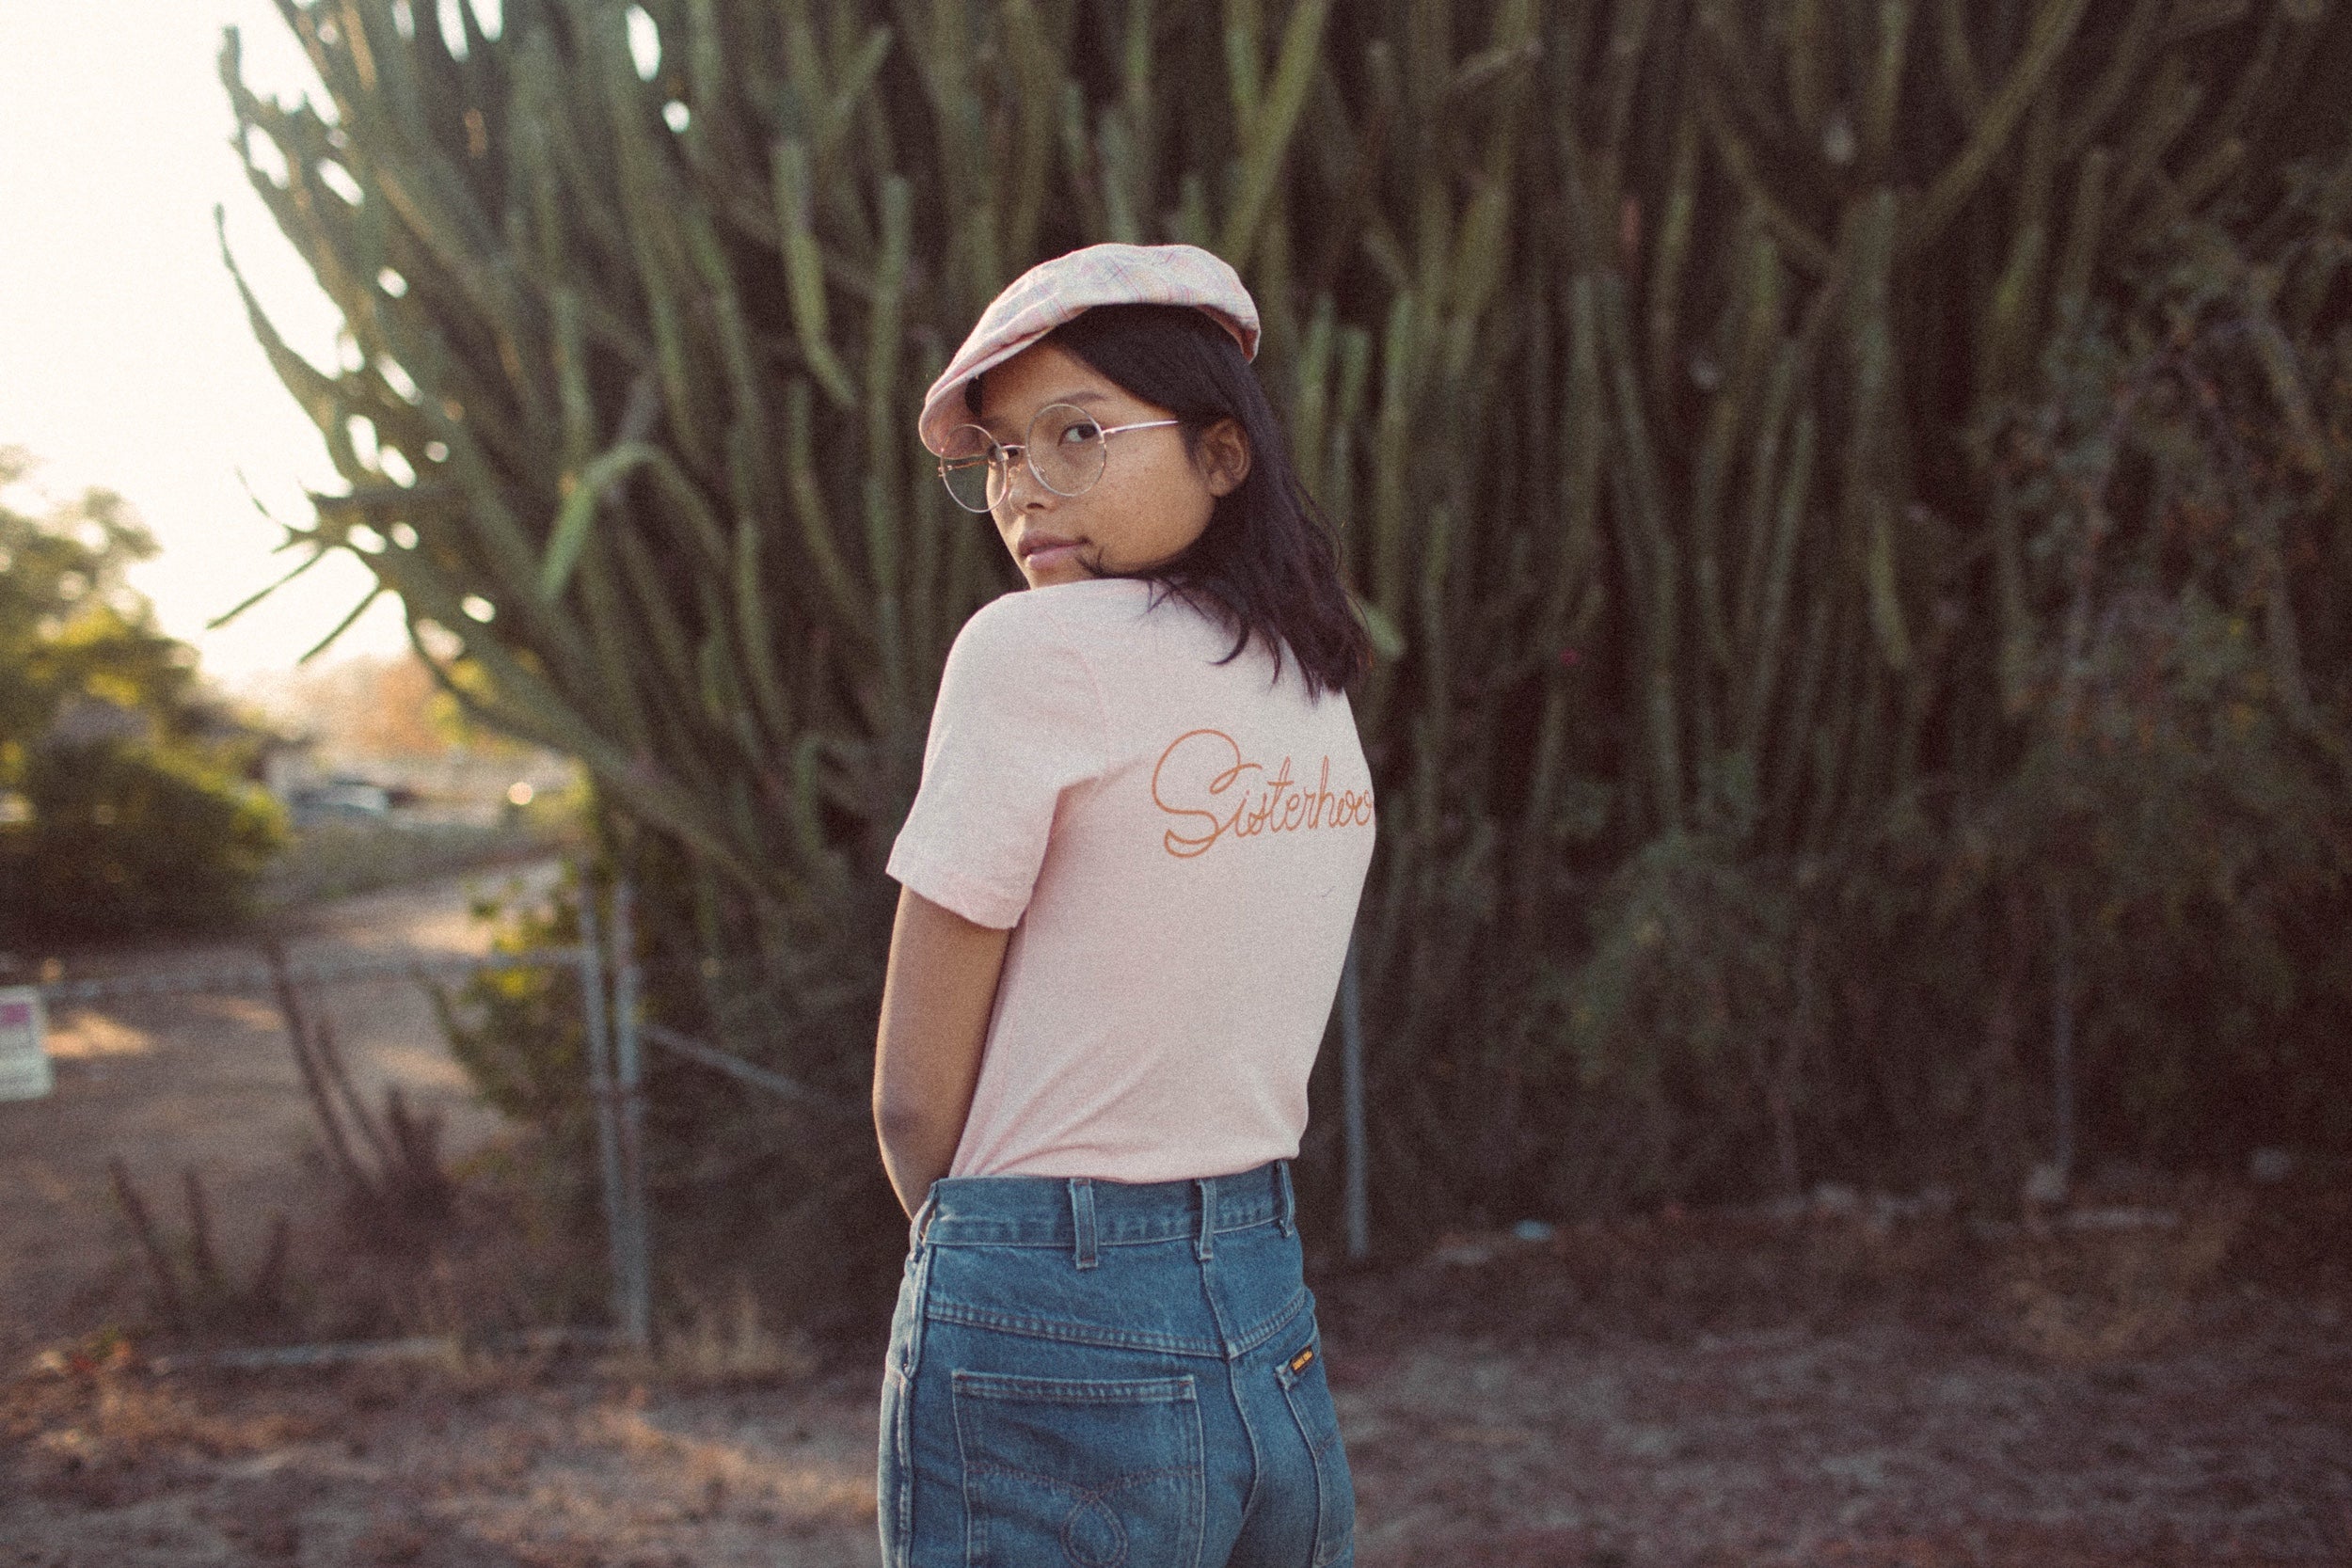 Image of a model wearing a hat and a t-shirt looking back over her shoulder against a background of trees